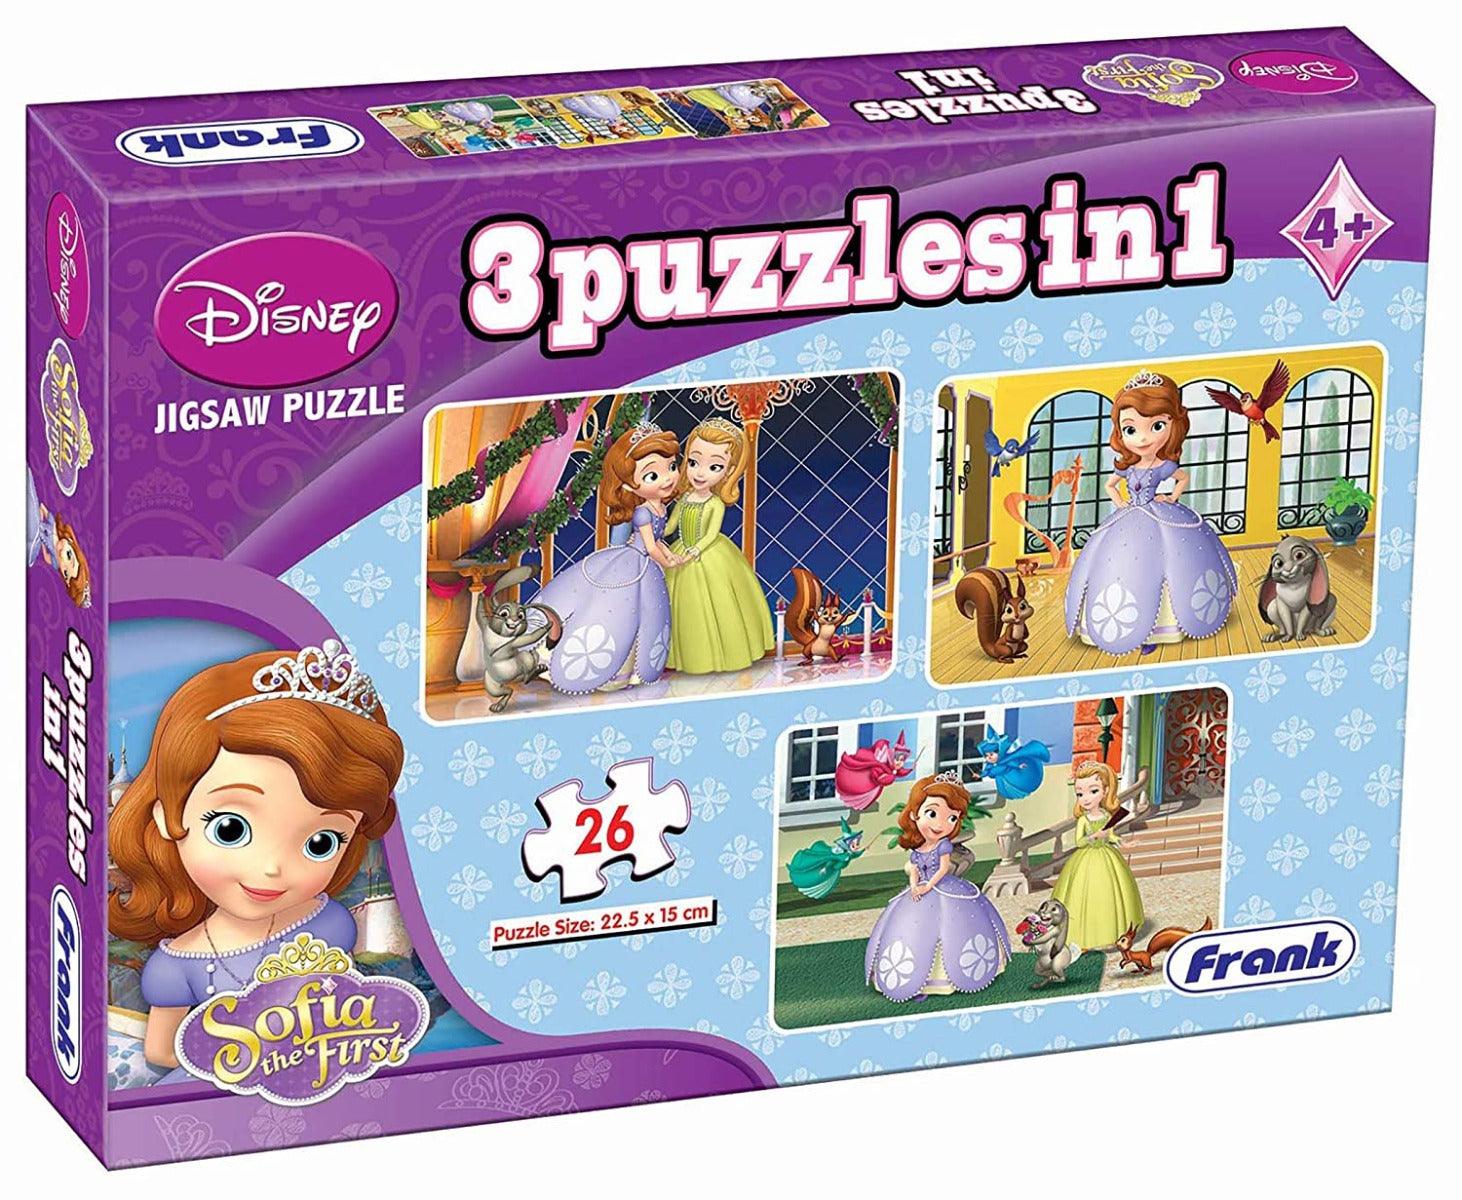 Frank Sofia The First 3 in 1 Jigsaw Puzzle (26pcs)